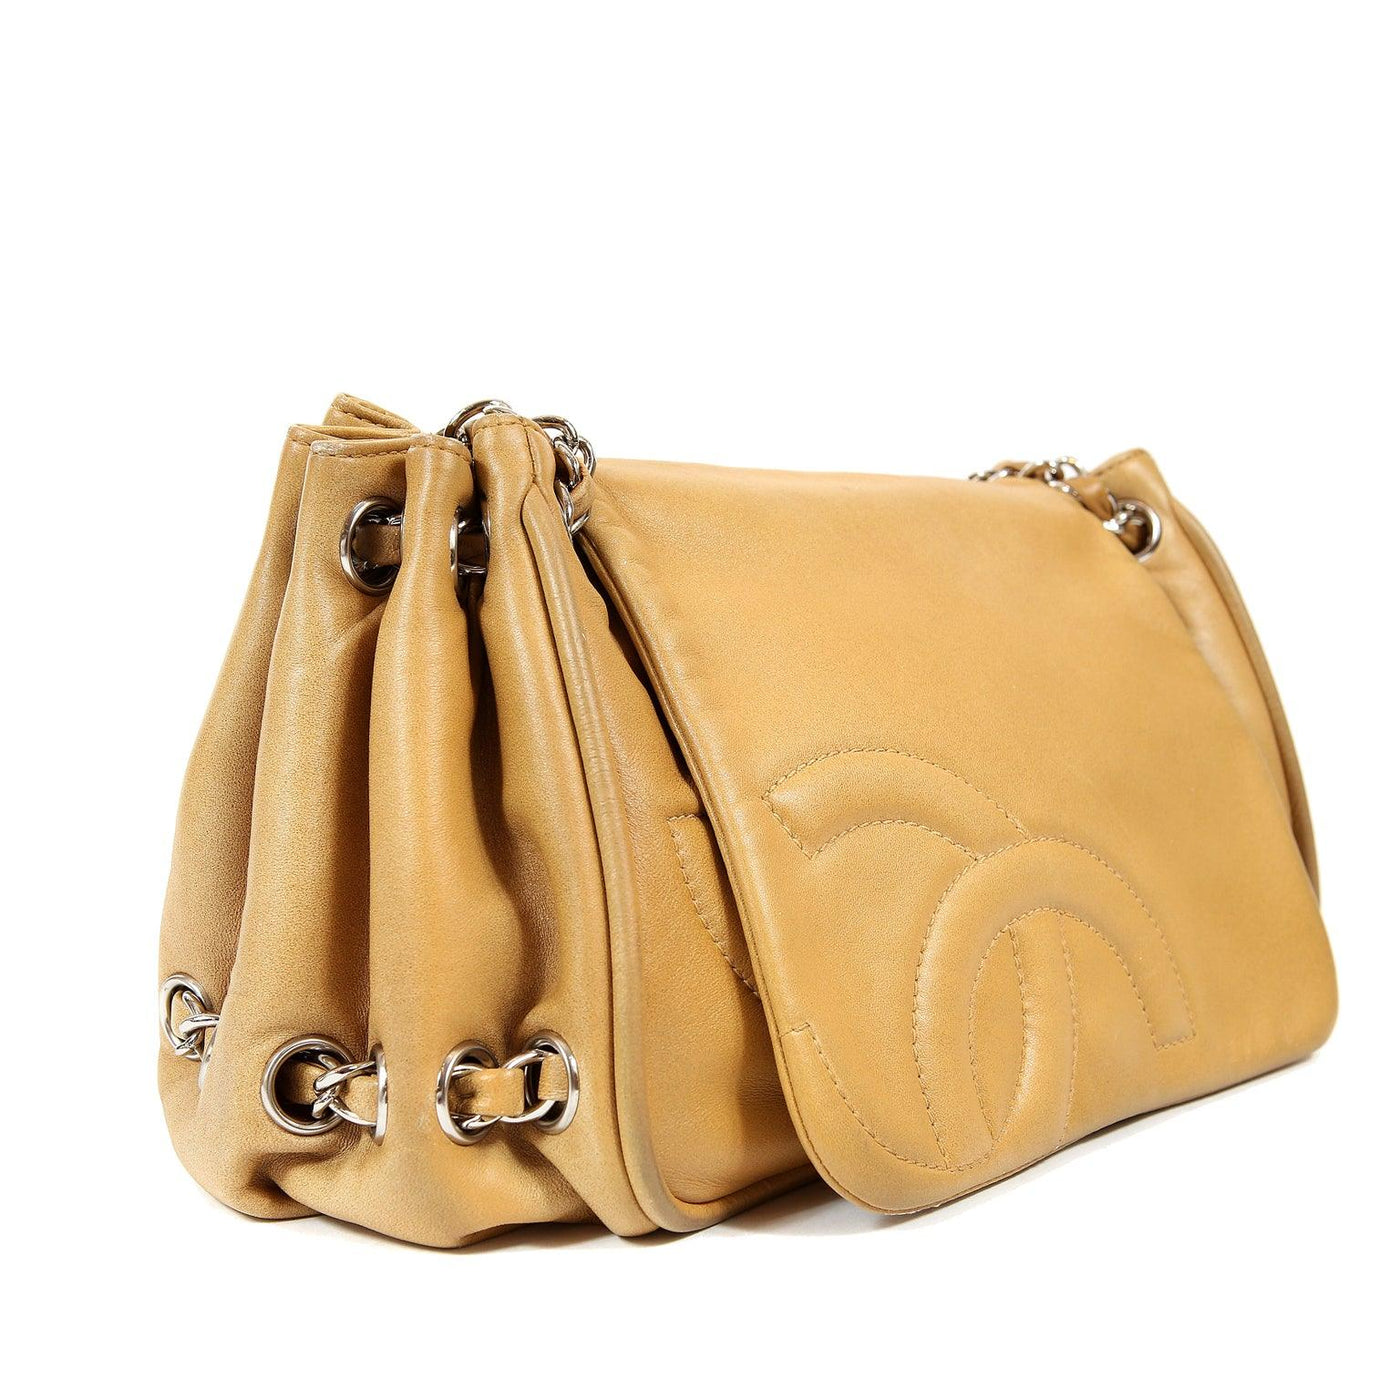 CHANEL ACCORDION FLAP BAG, brown suede with intertwined CC logo on